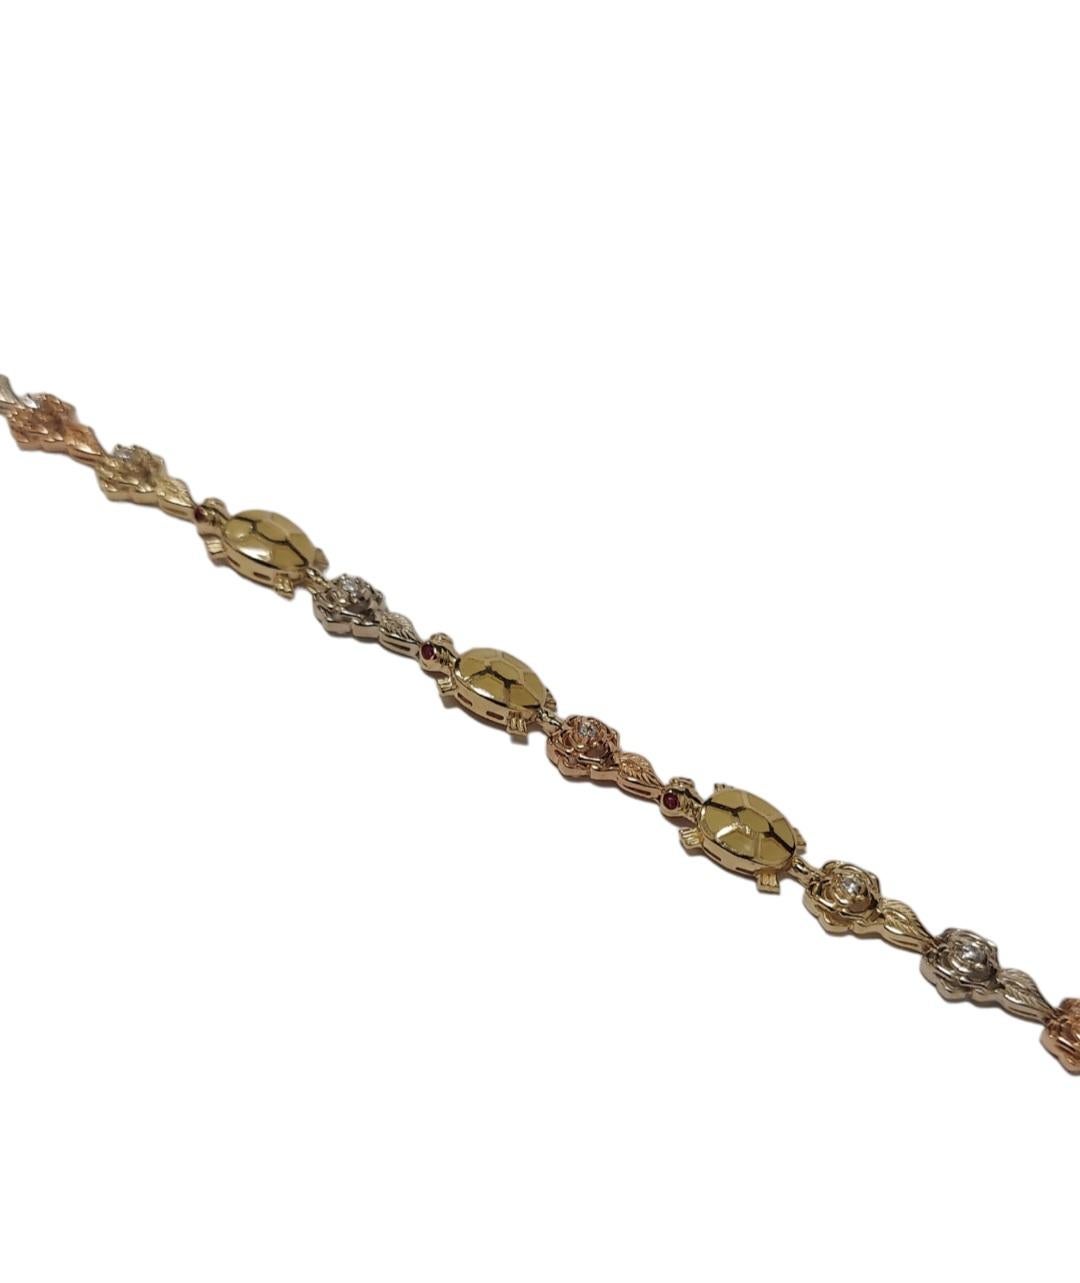 Description
Brand - Stamp
Gender - Ladies 
Style - Bracelet 
Metals - 14k Tri tone gold 
Gemstone - Diamond 
Length - 7 1/2 inches 
Weight - 10.6 Grams
(New Jewelry Box Included)